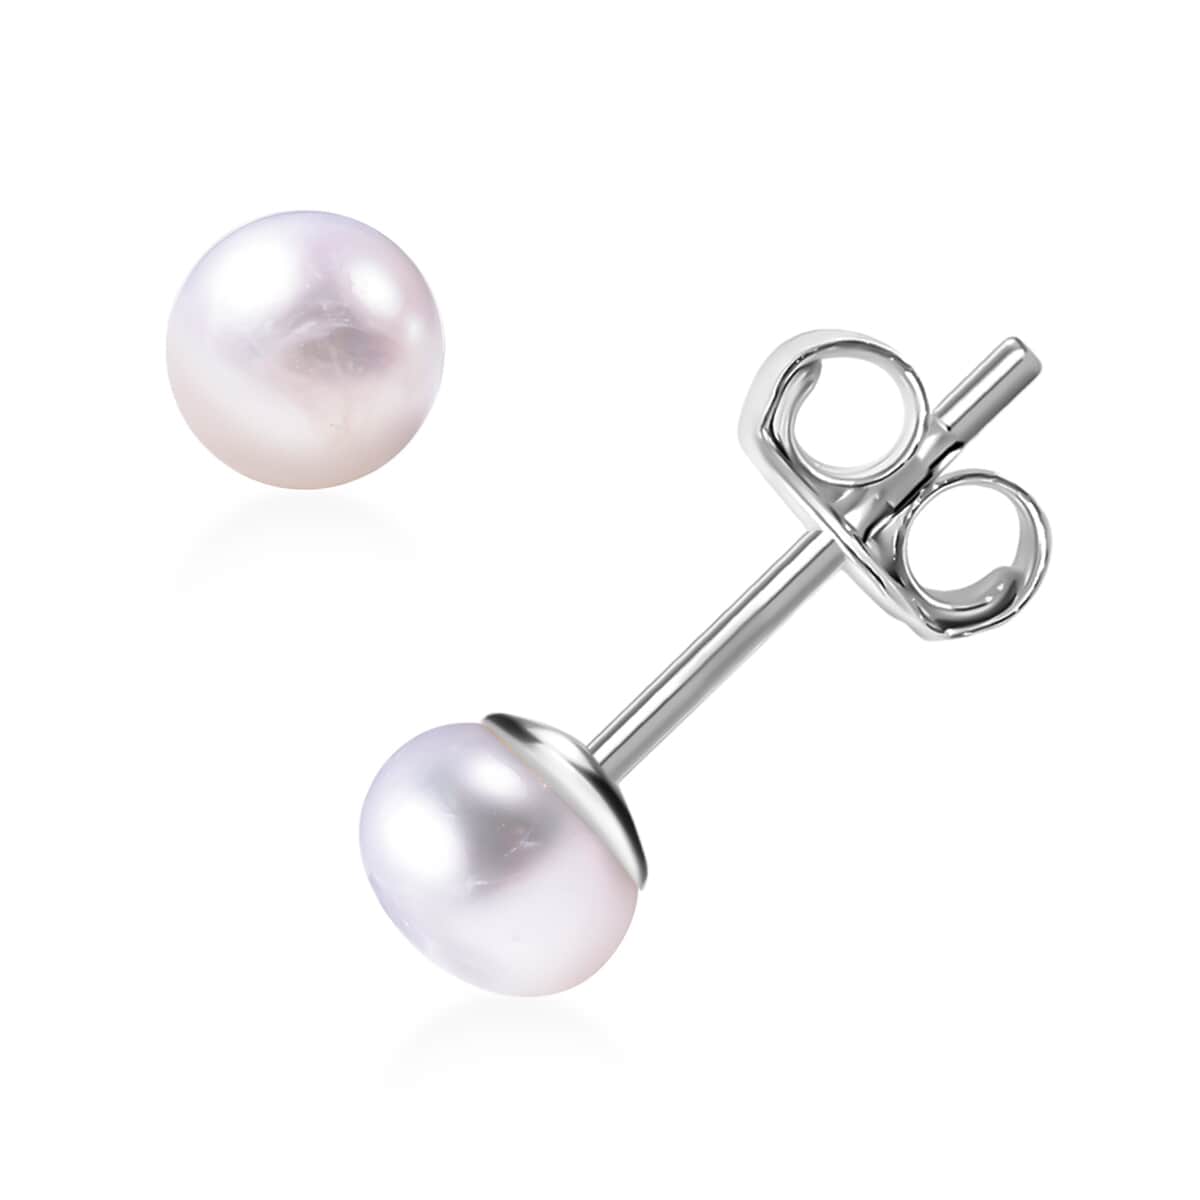 Set of 5 Freshwater Cultured White Pearl Stud Earrings in Stainless Steel| Solitaire Pearl Earrings| Pearl Jewelry For Women image number 5